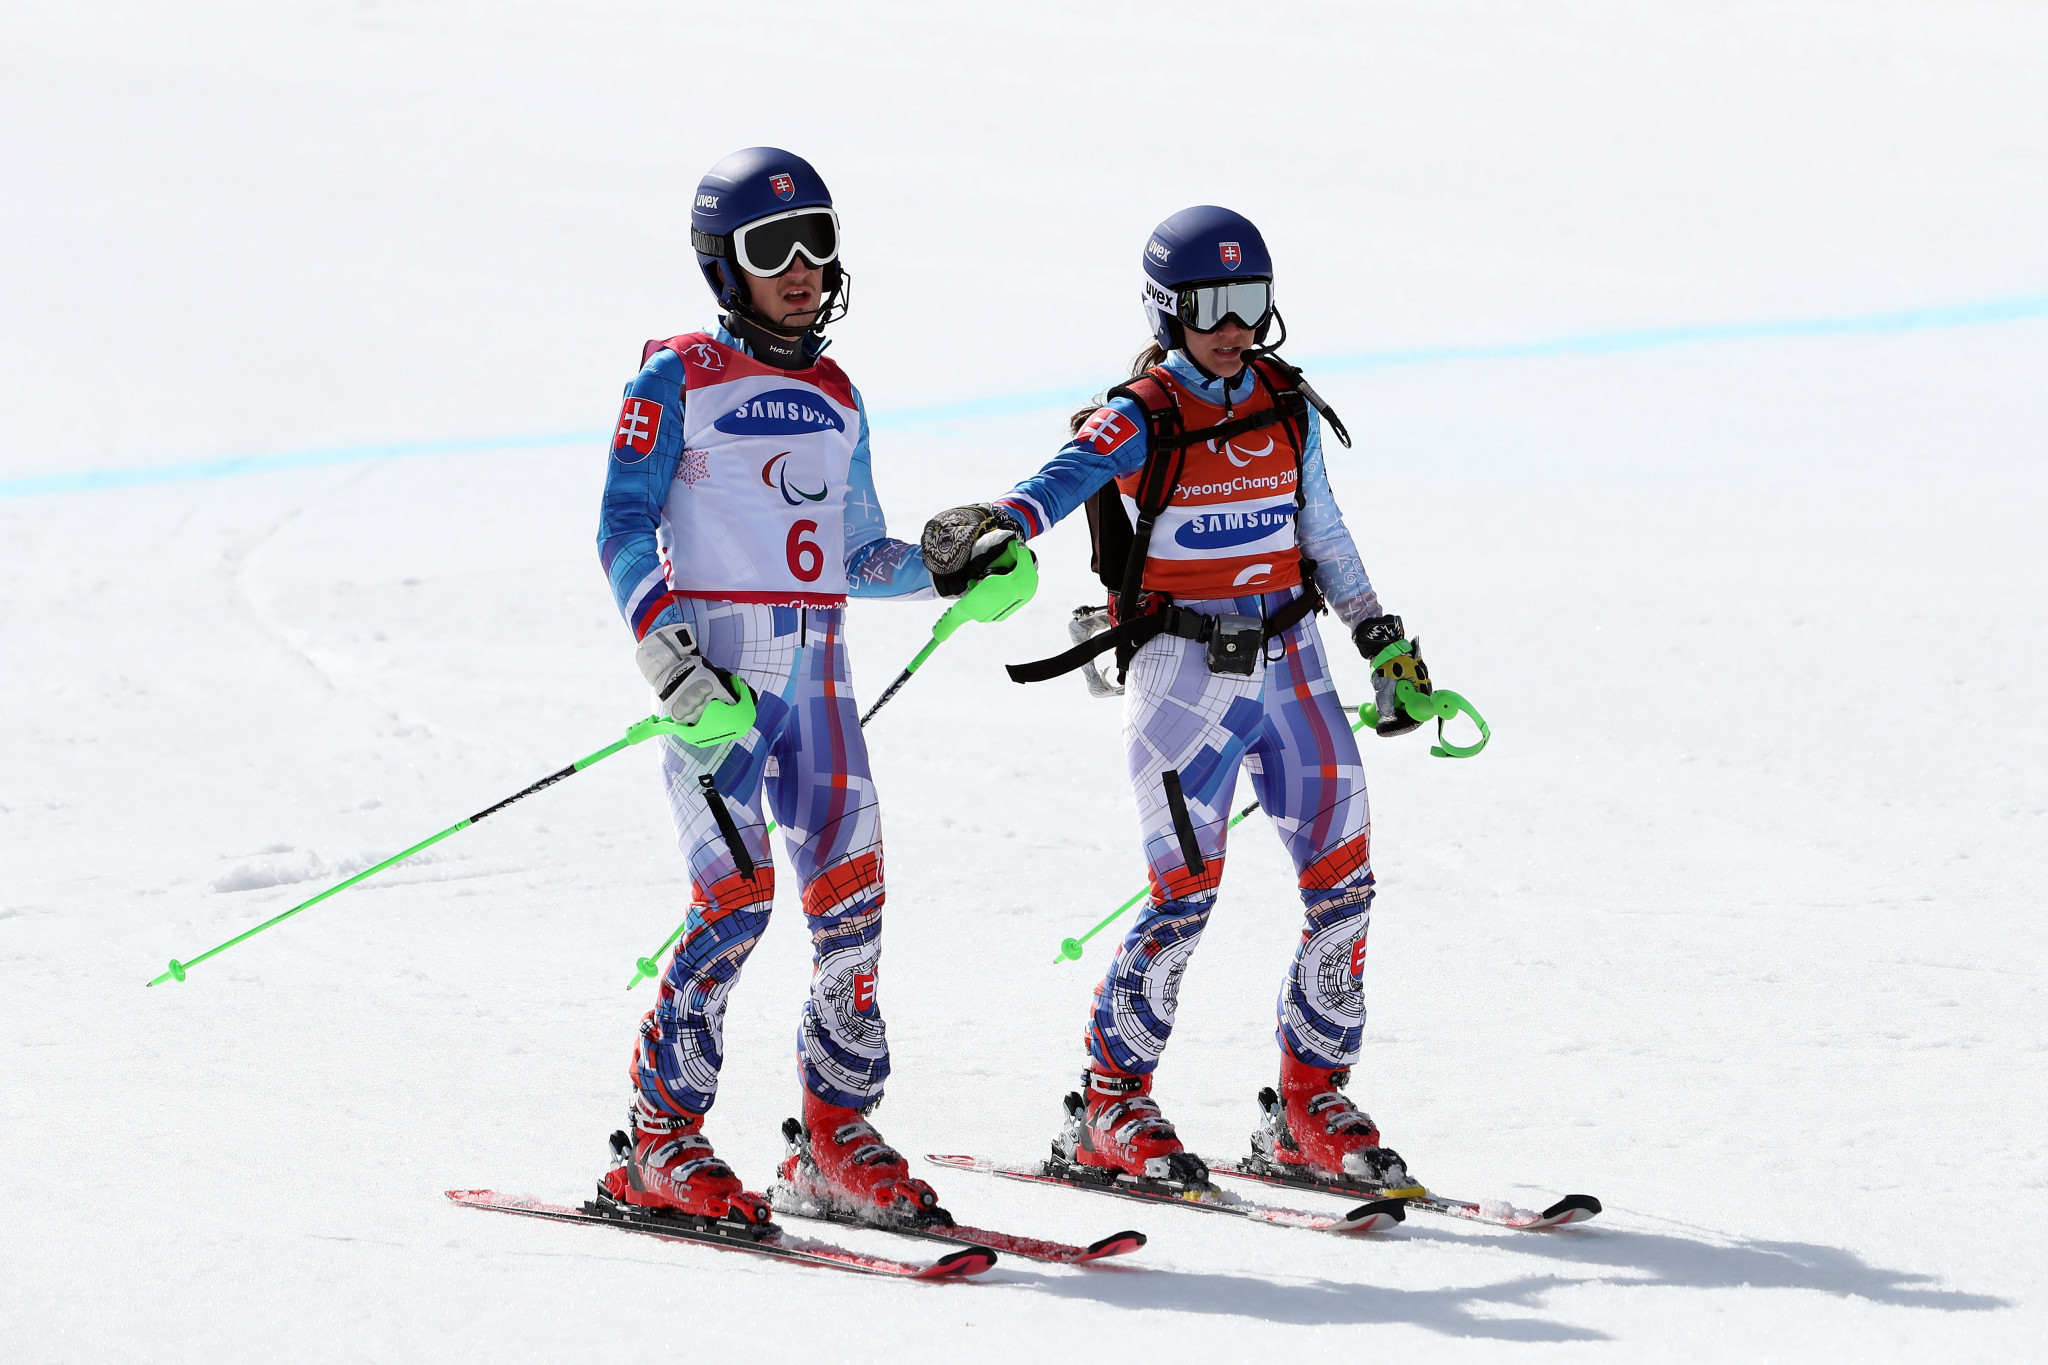 Slovakia's Marek Kubacka returned to the top of the podium in the men's visually impaired event ©Getty Images